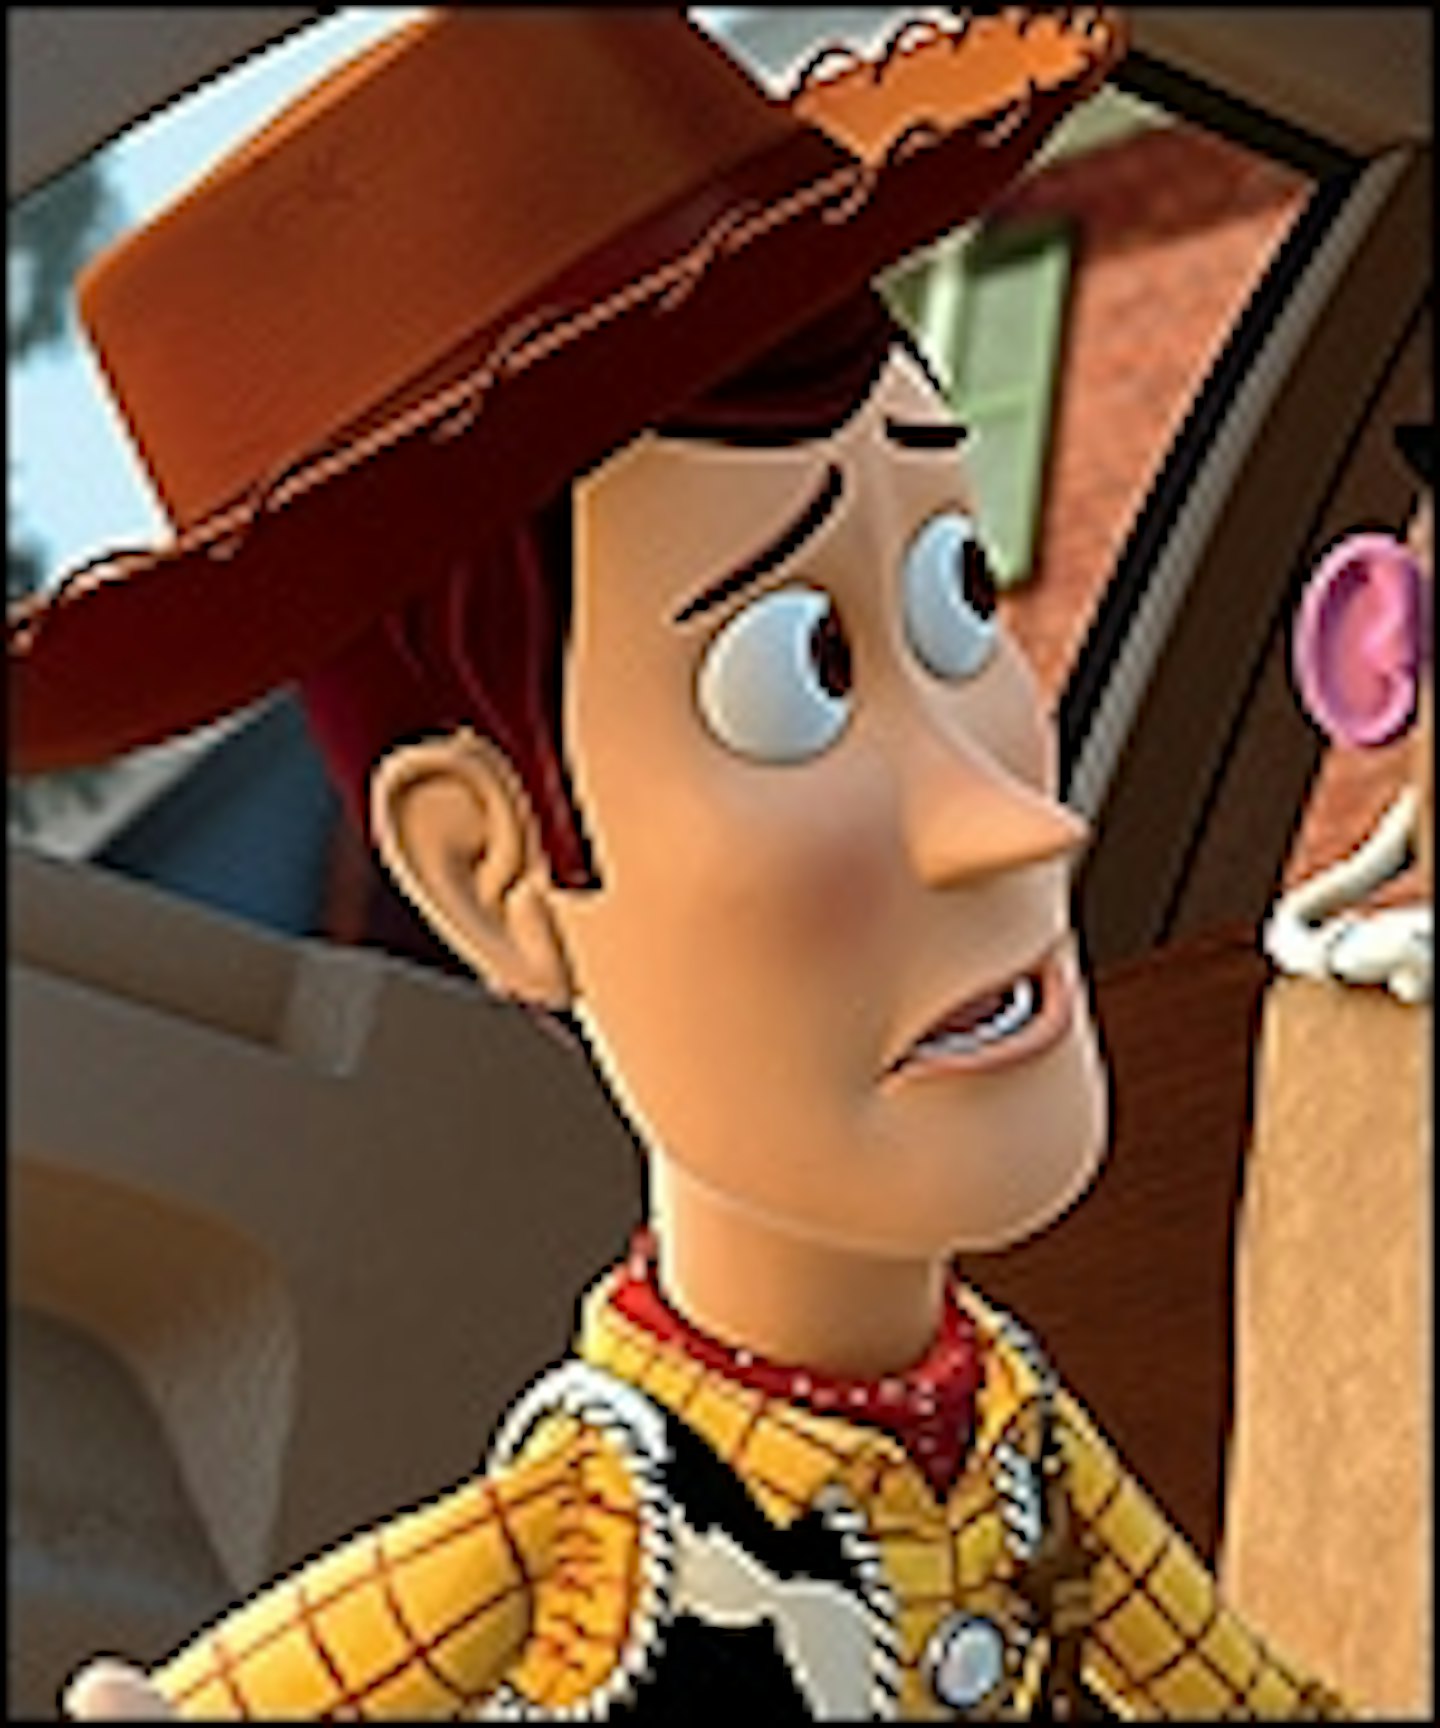 Exclusive: New Toy Story 3 Pic